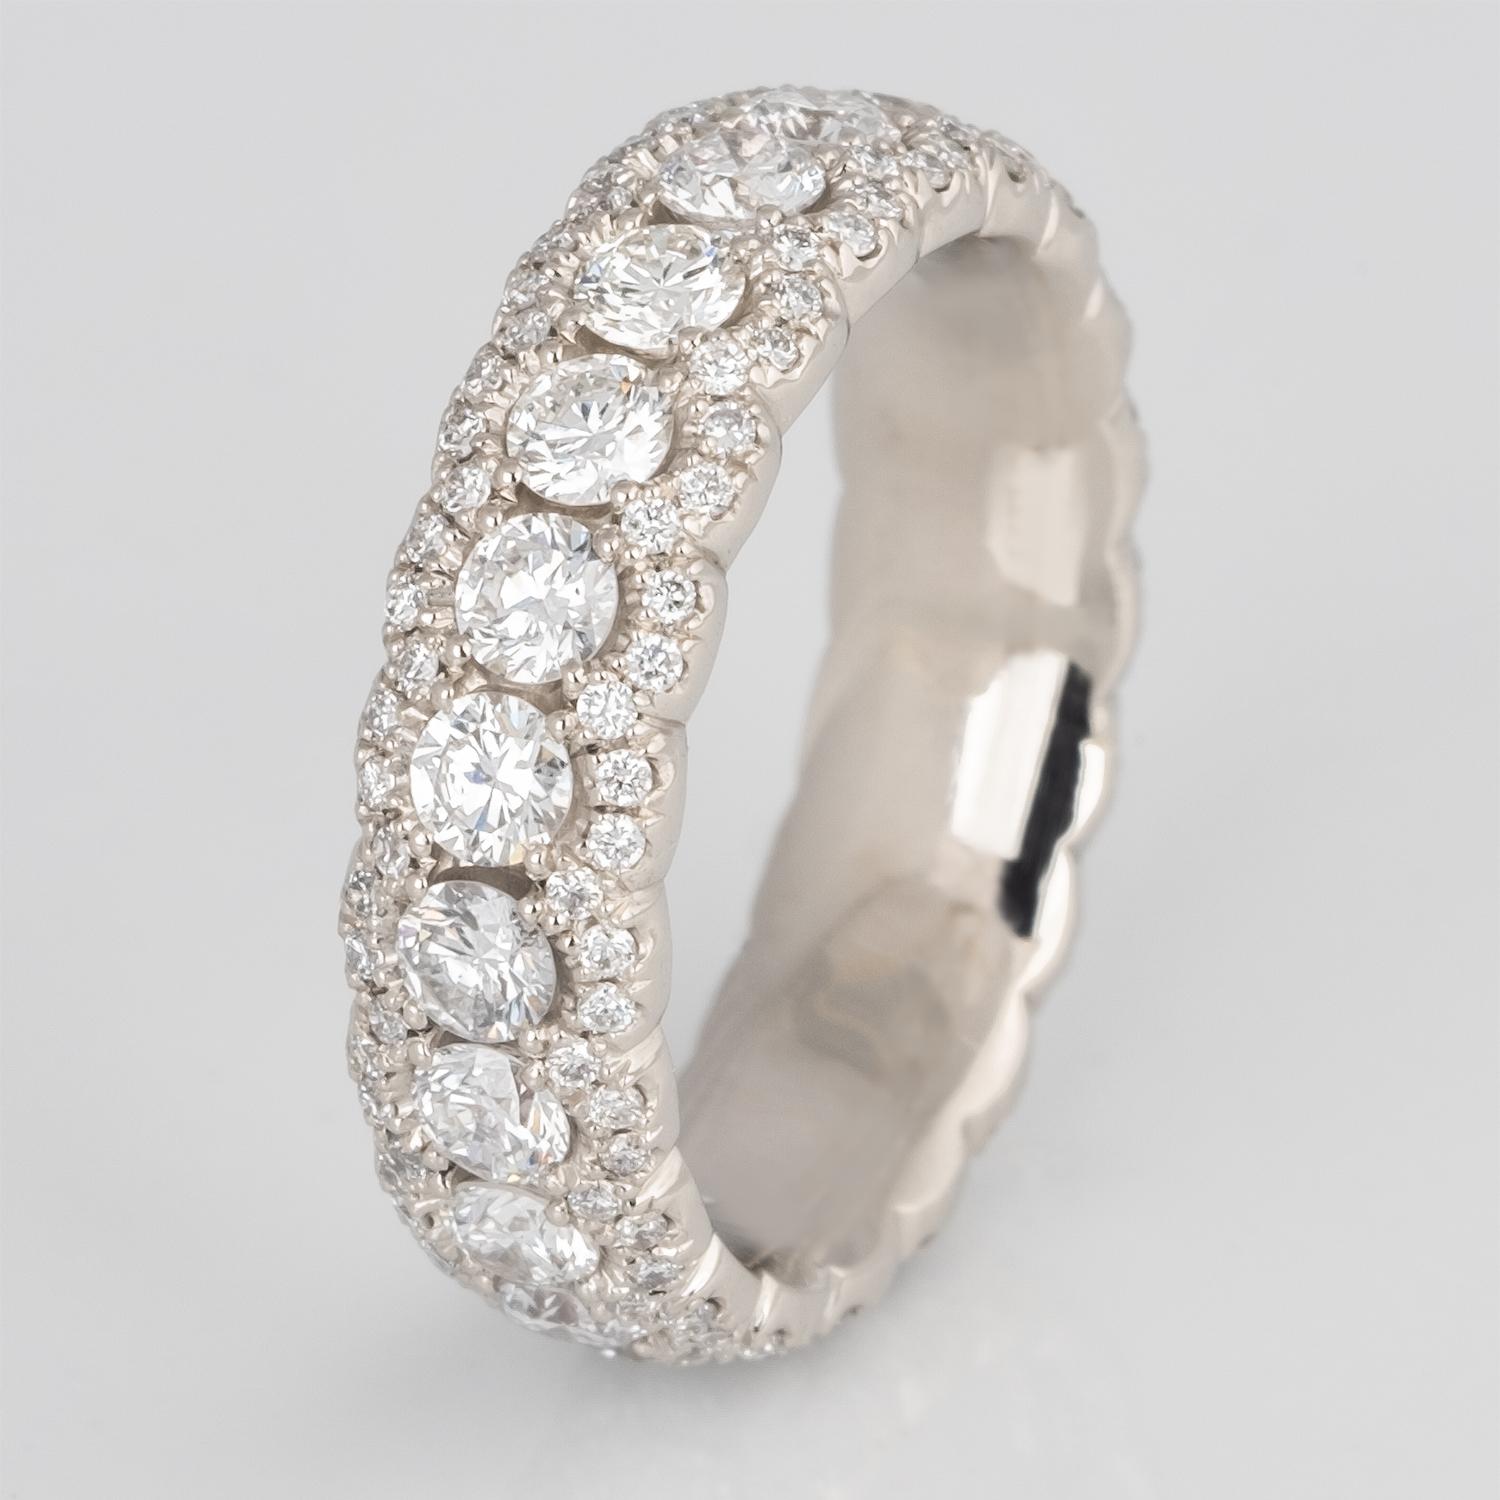 This delicate and sparkly scalloped eternity ring has 1.57 carats of diamonds hand set into a comfort fit band. It is super comfortable for an eternity ring with so many diamonds. 
The diamonds are expertly set and perfectly spaced which means each